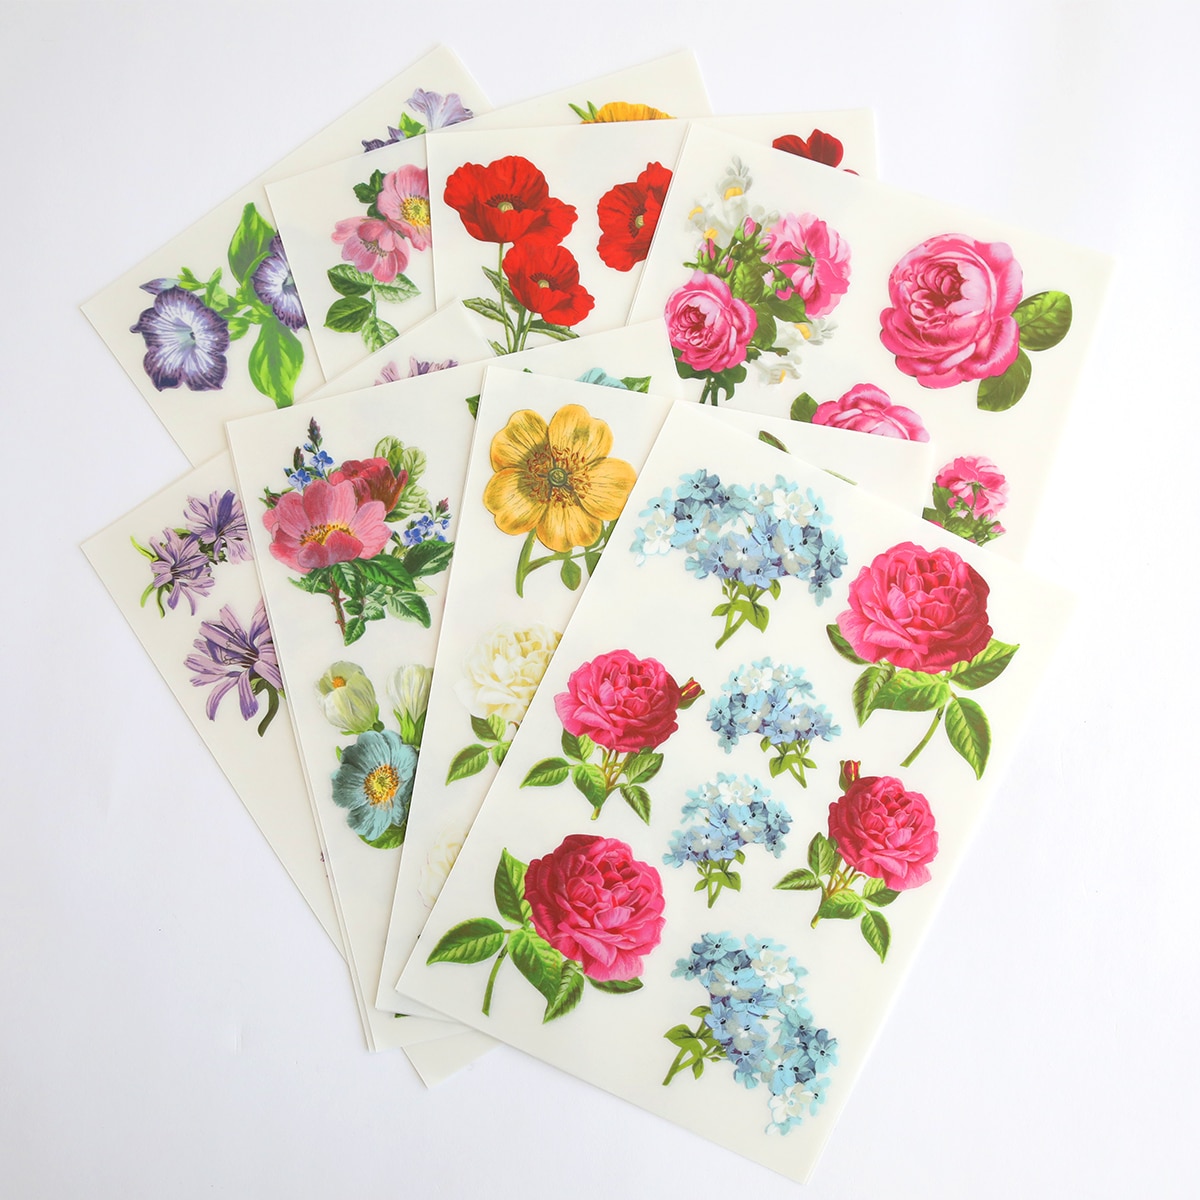 A bunch of Celebrations Floral 3D Stickers and Rub Ons on a white surface.